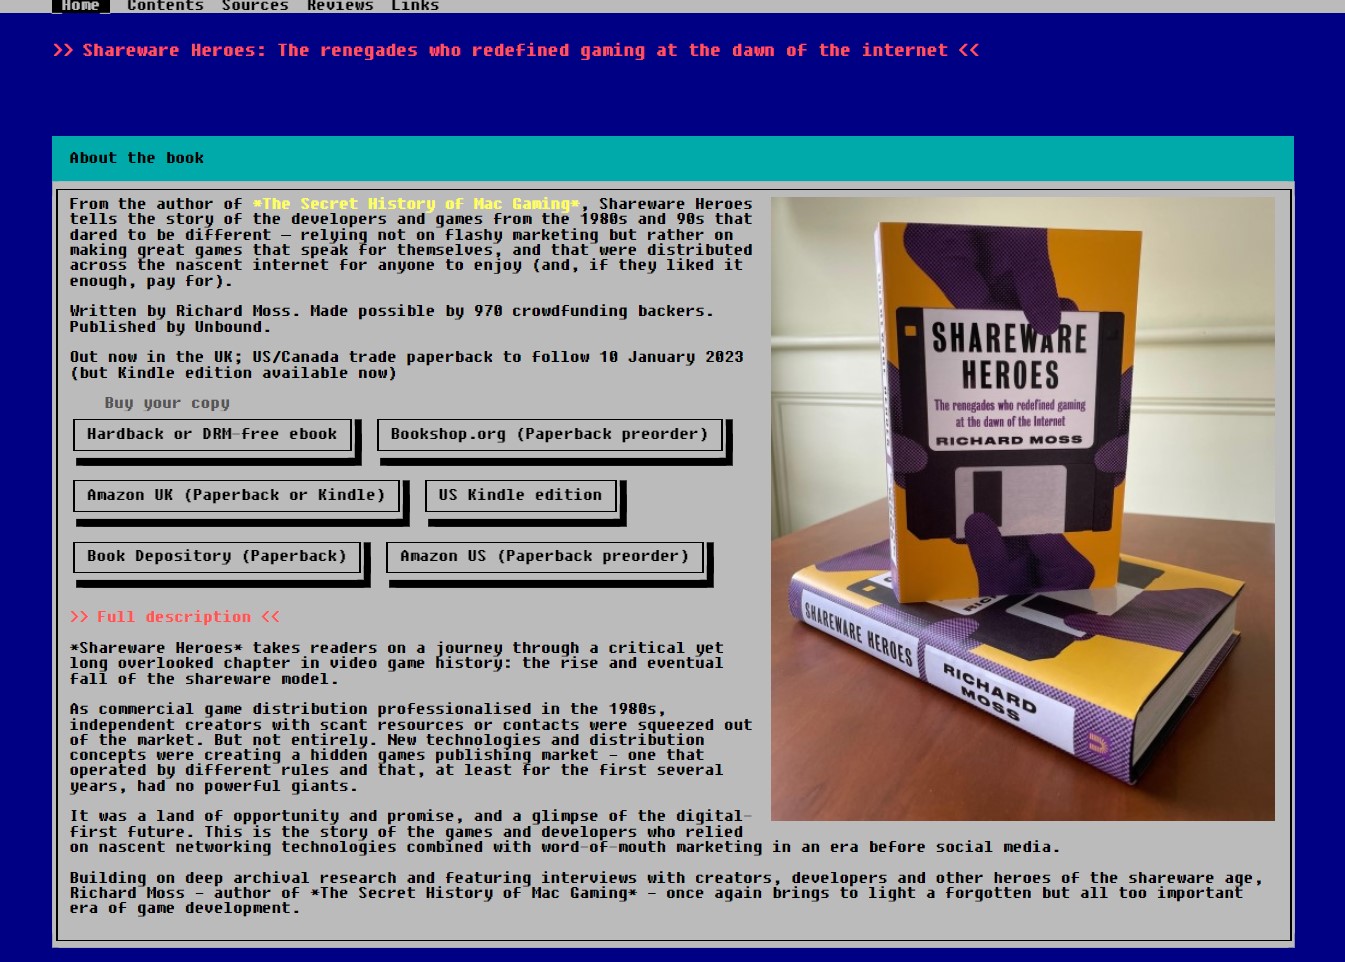 Screenshot of the main page at sharewareheroes.com. Includes short and long descriptions of the book plus links to buy the book.